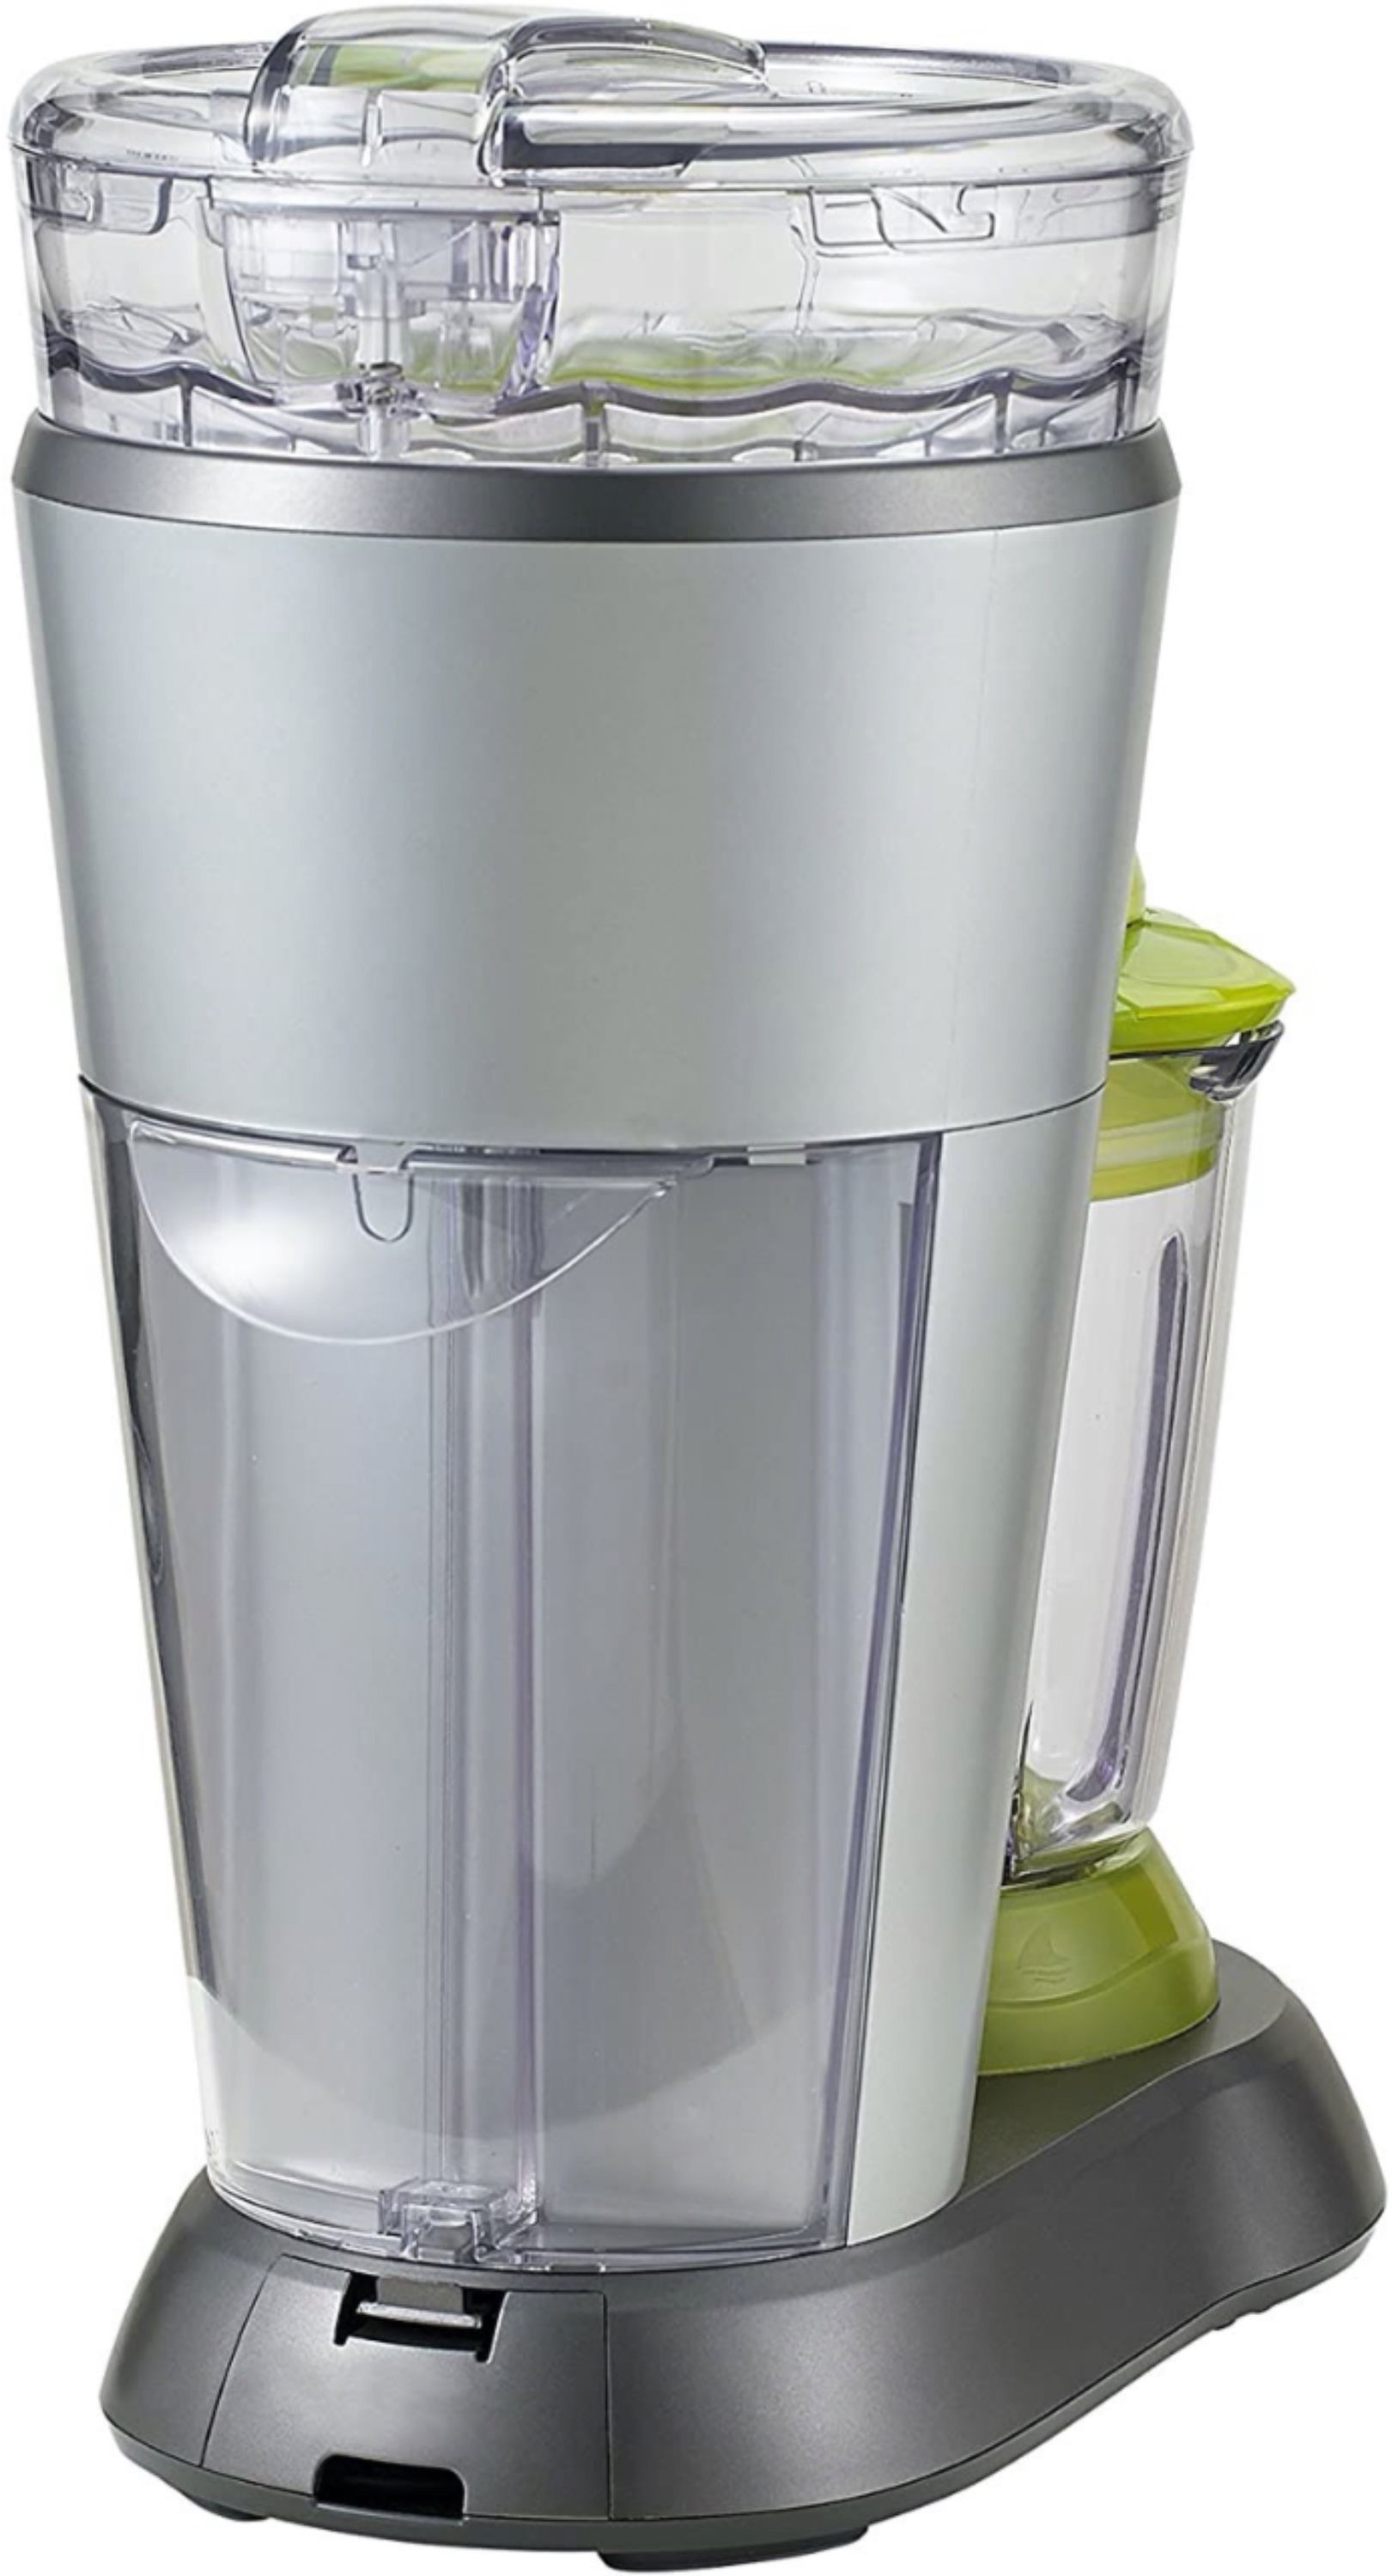 Margaritaville Bahamas Frozen Concoction Dual Mode Beverage Maker Home  Margarita Machine with No-Brainer Mixer and, 36 Ounce Pitcher